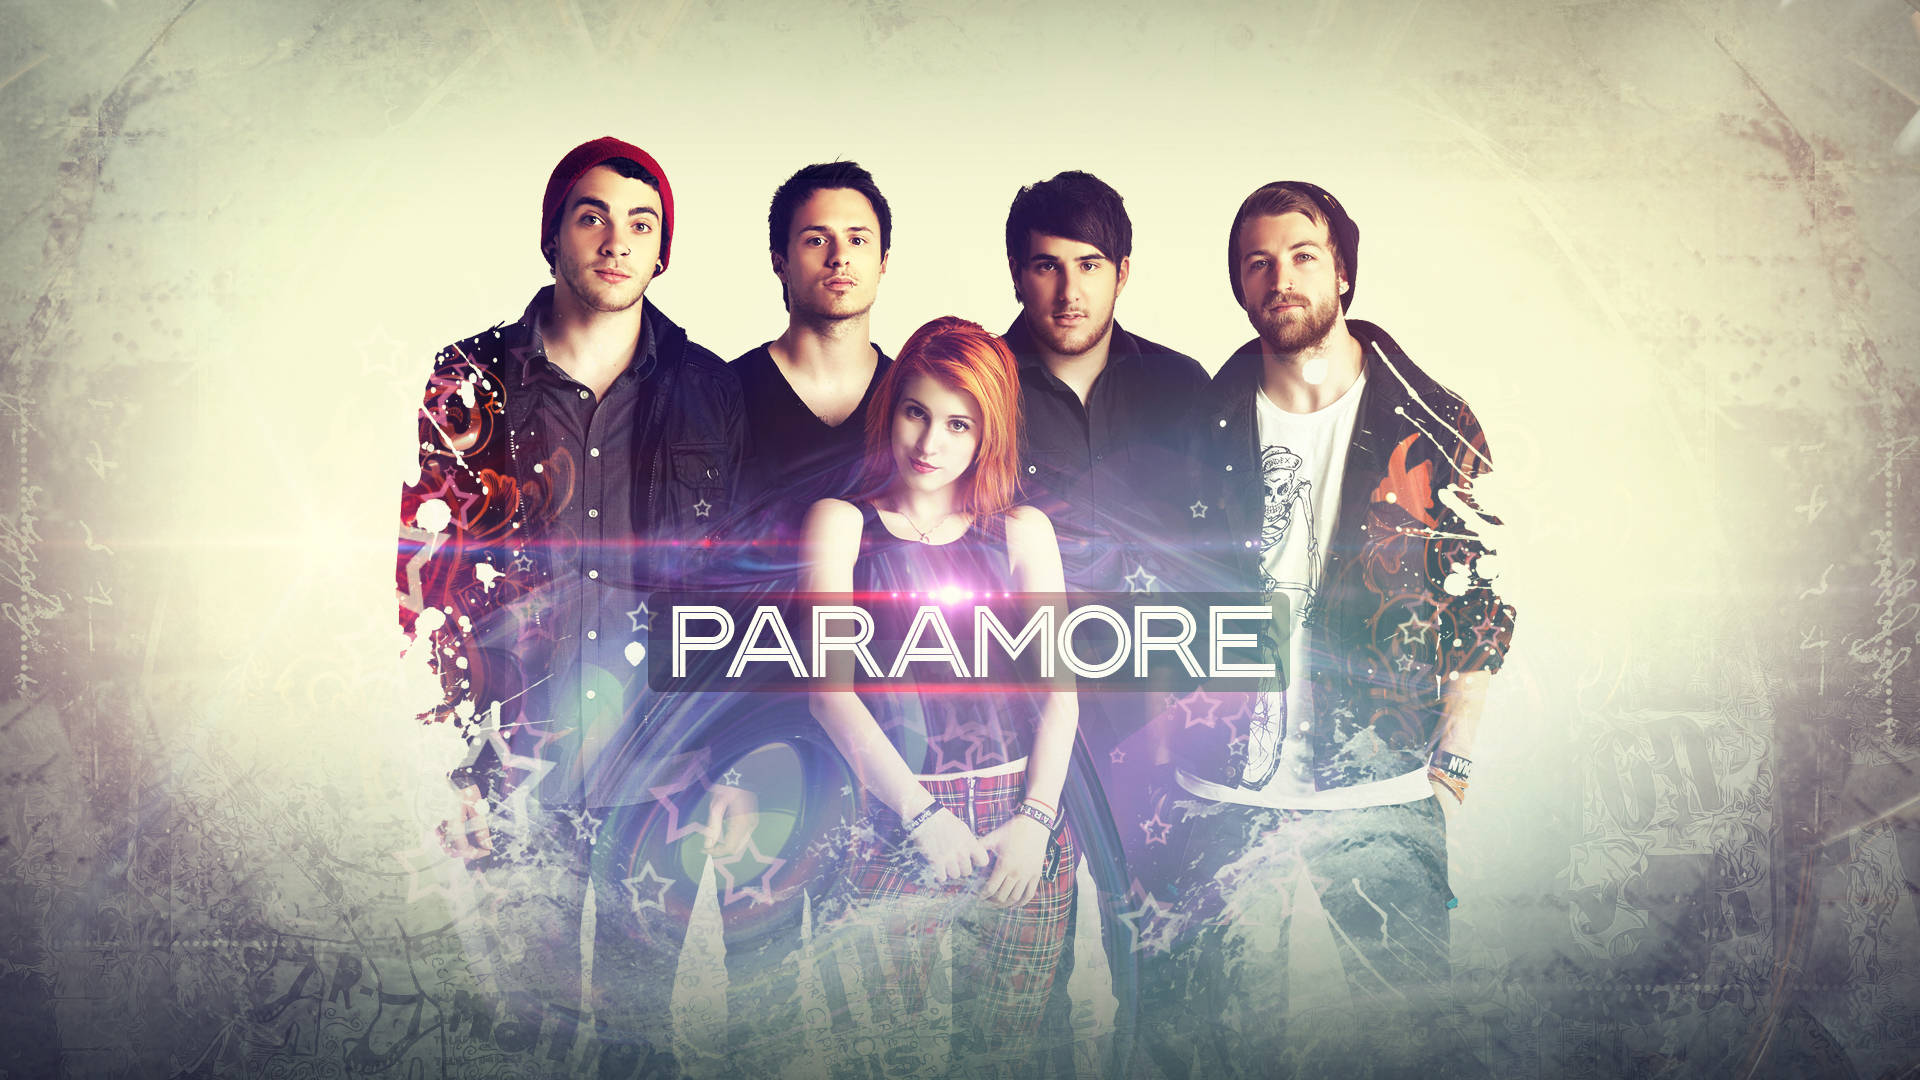 Paramore Band Fanart Poster Background